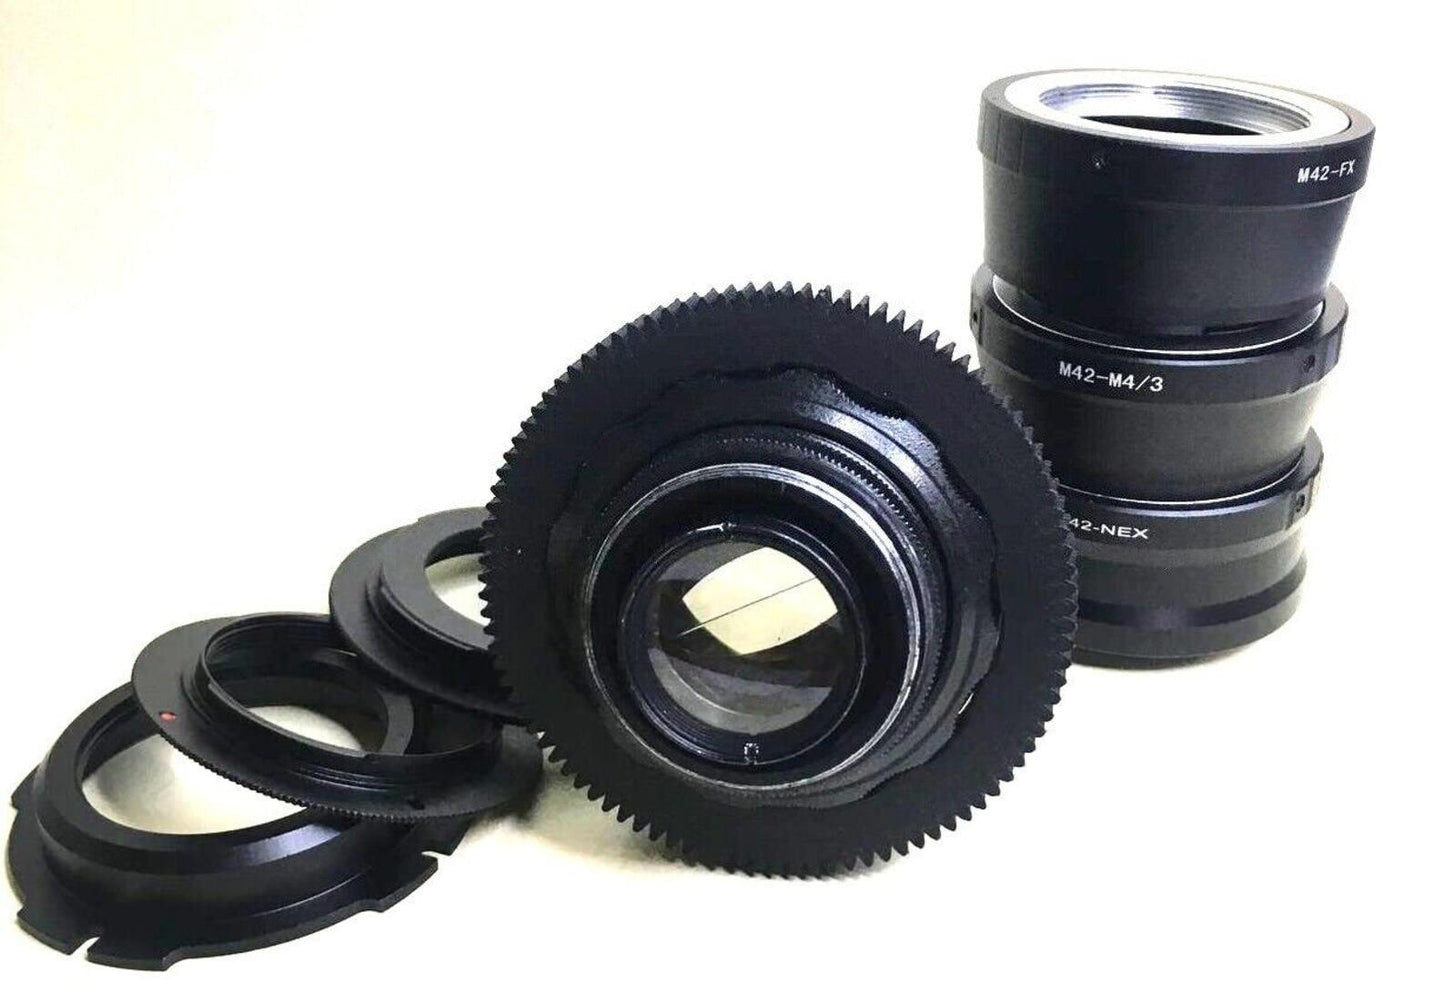 Anamorphic lens Helios 44-2 58mm f/2.0 Cine mod Canon EF mount, Sony NEX and more.